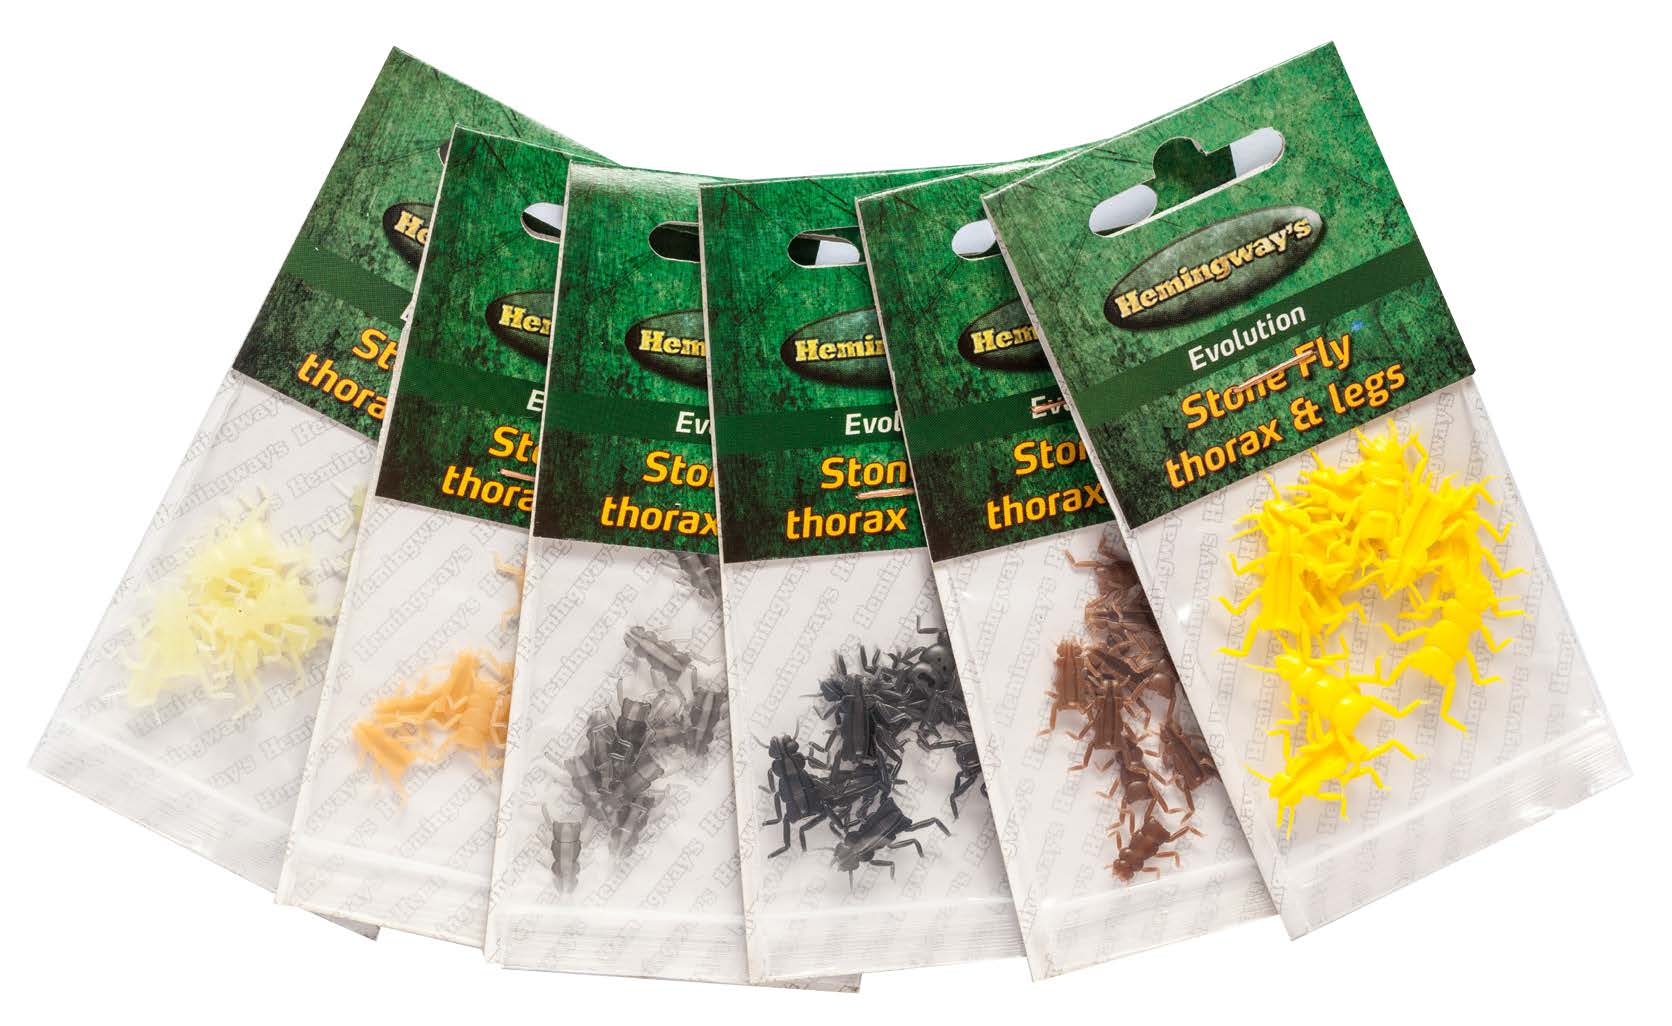 Hemingway's Evolution Stone Fly Thorax & Legs Large Clear Yellow Fly Tying Materials